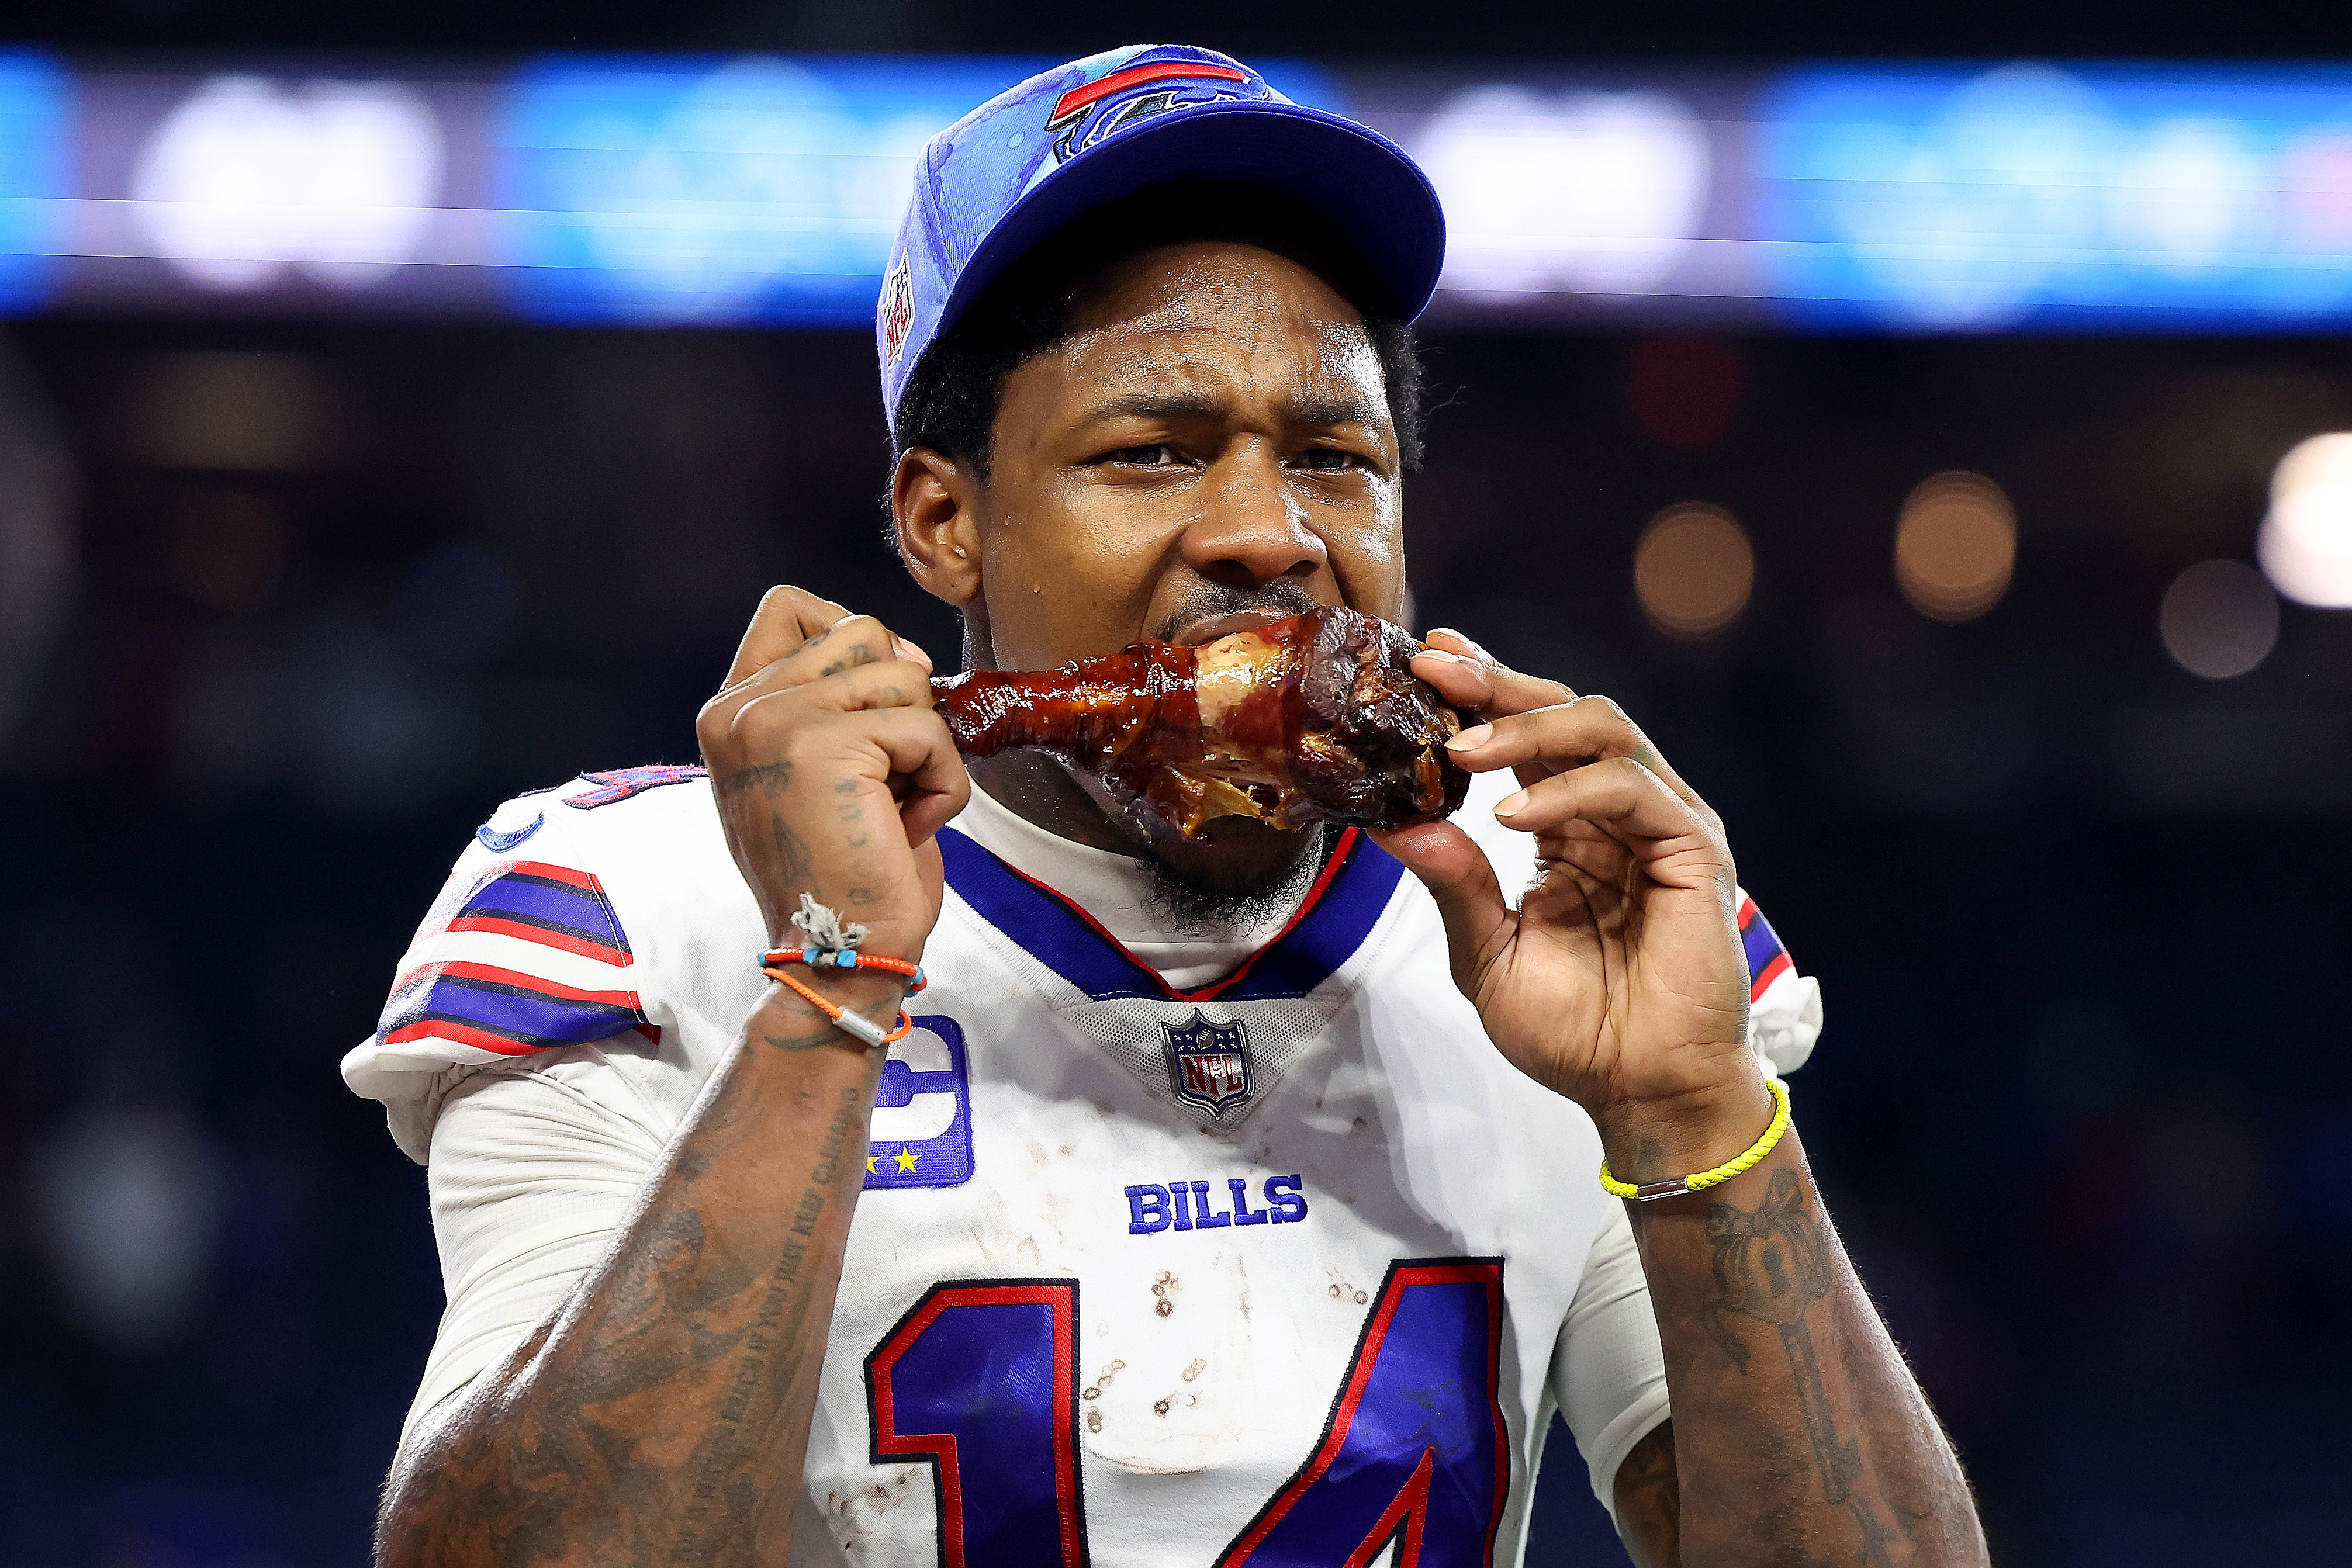 Stefon Diggs #14 of the Buffalo Bills celebrates on the field after defeating the Detroit Lions at Ford Field on November 24, 2022 in Detroit, Michigan.